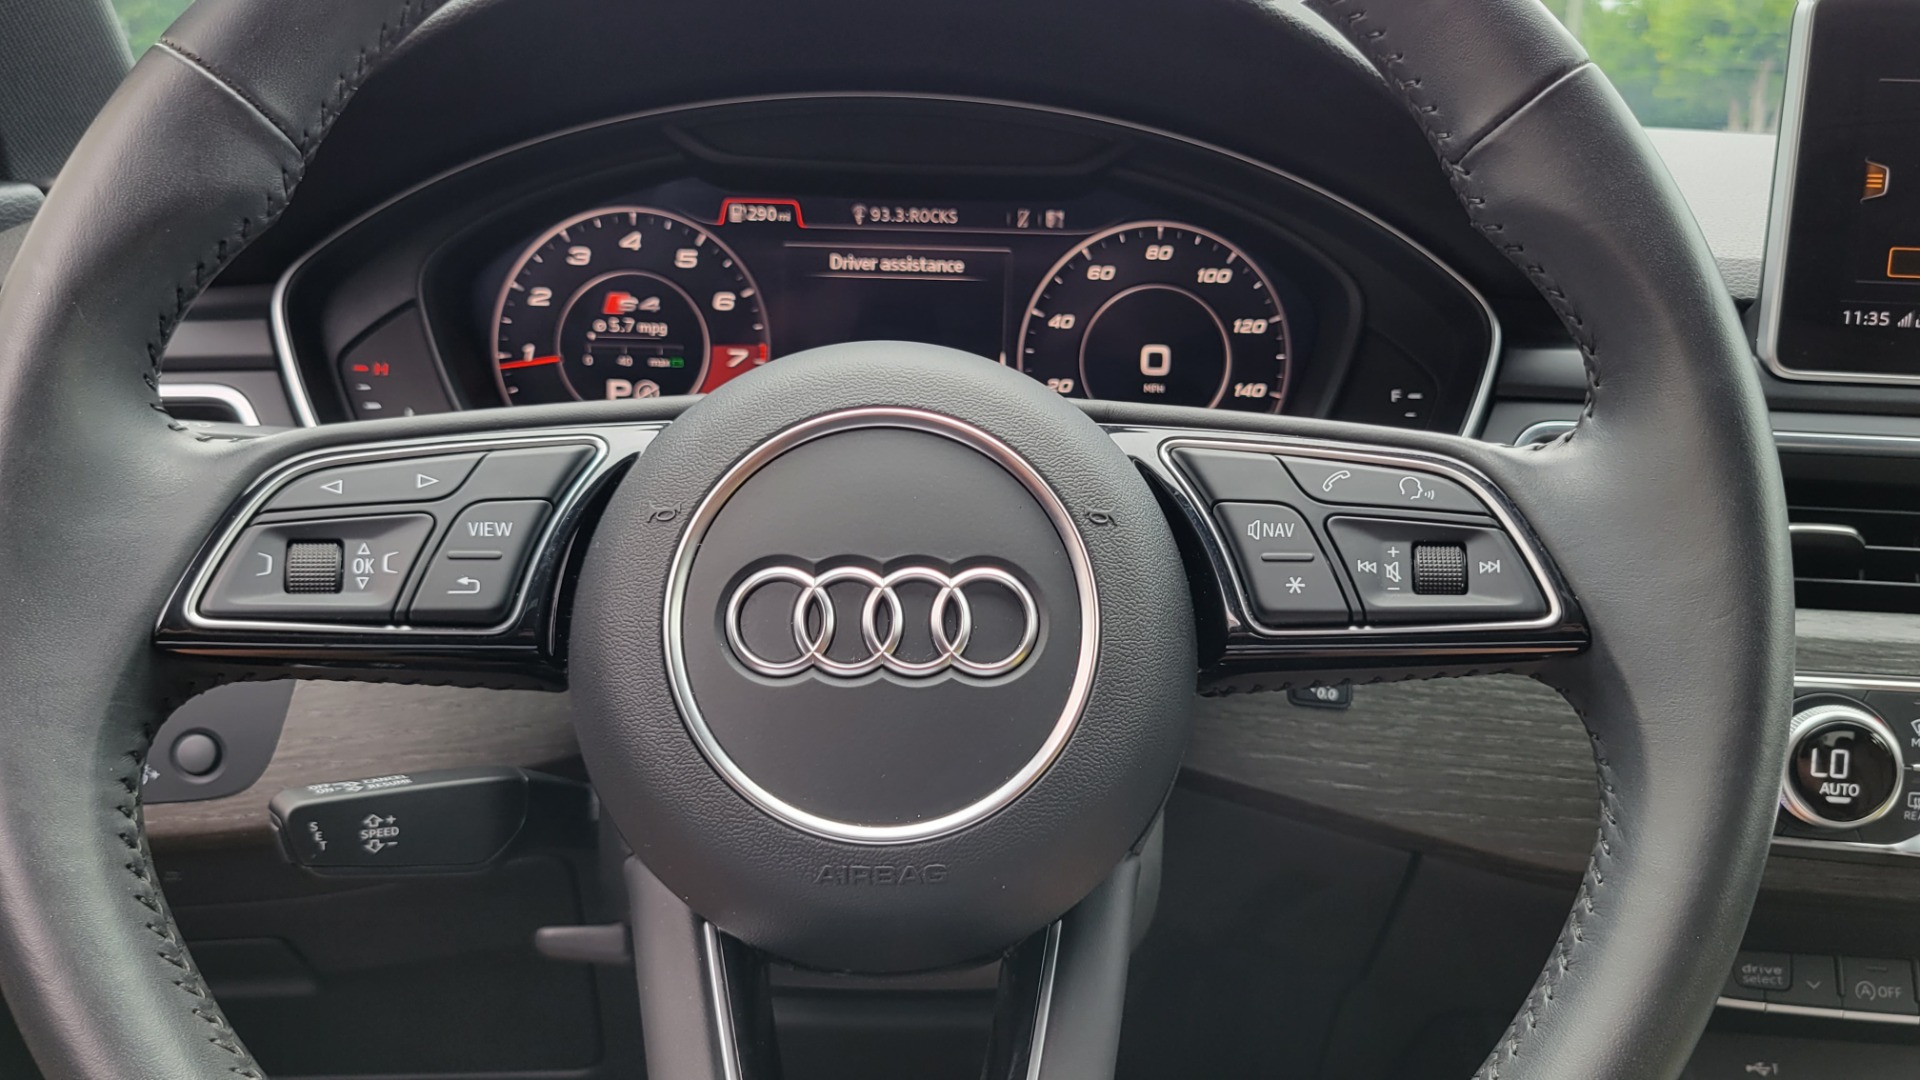 Used 2019 Audi A4 PREMIUM PLUS QUATTRO / SPORT / NAV / SUNROOF / REARVIEW for sale $37,495 at Formula Imports in Charlotte NC 28227 30